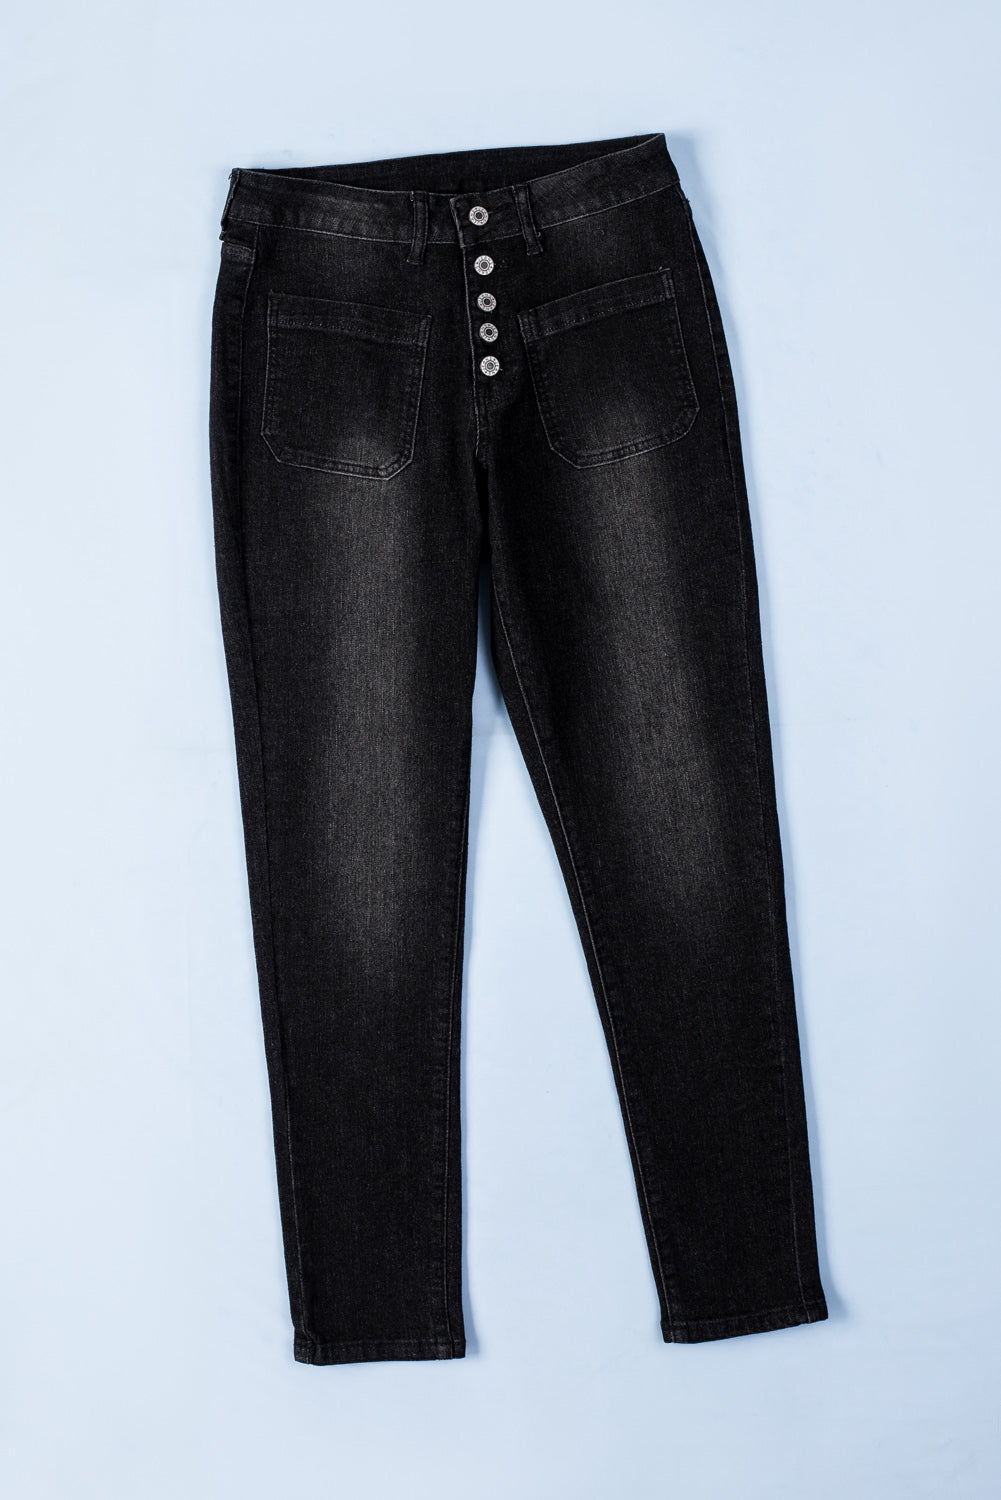 Black Button Fly Skinny Jeans with Pockets Jeans JT's Designer Fashion